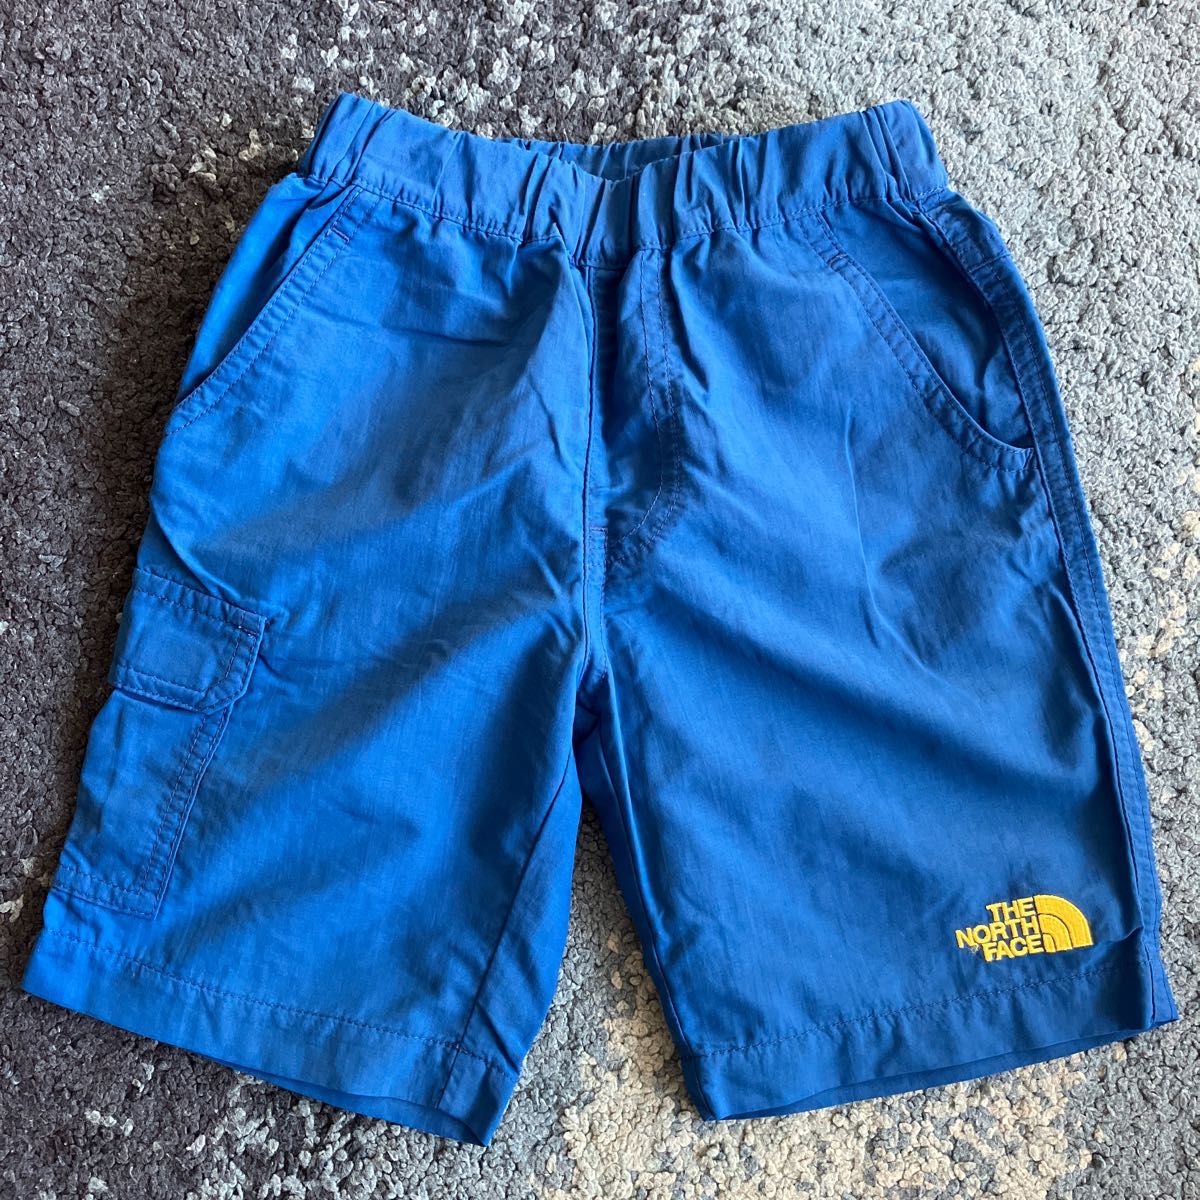 THE NORTH FACE ハーフパンツ　キッズ　100